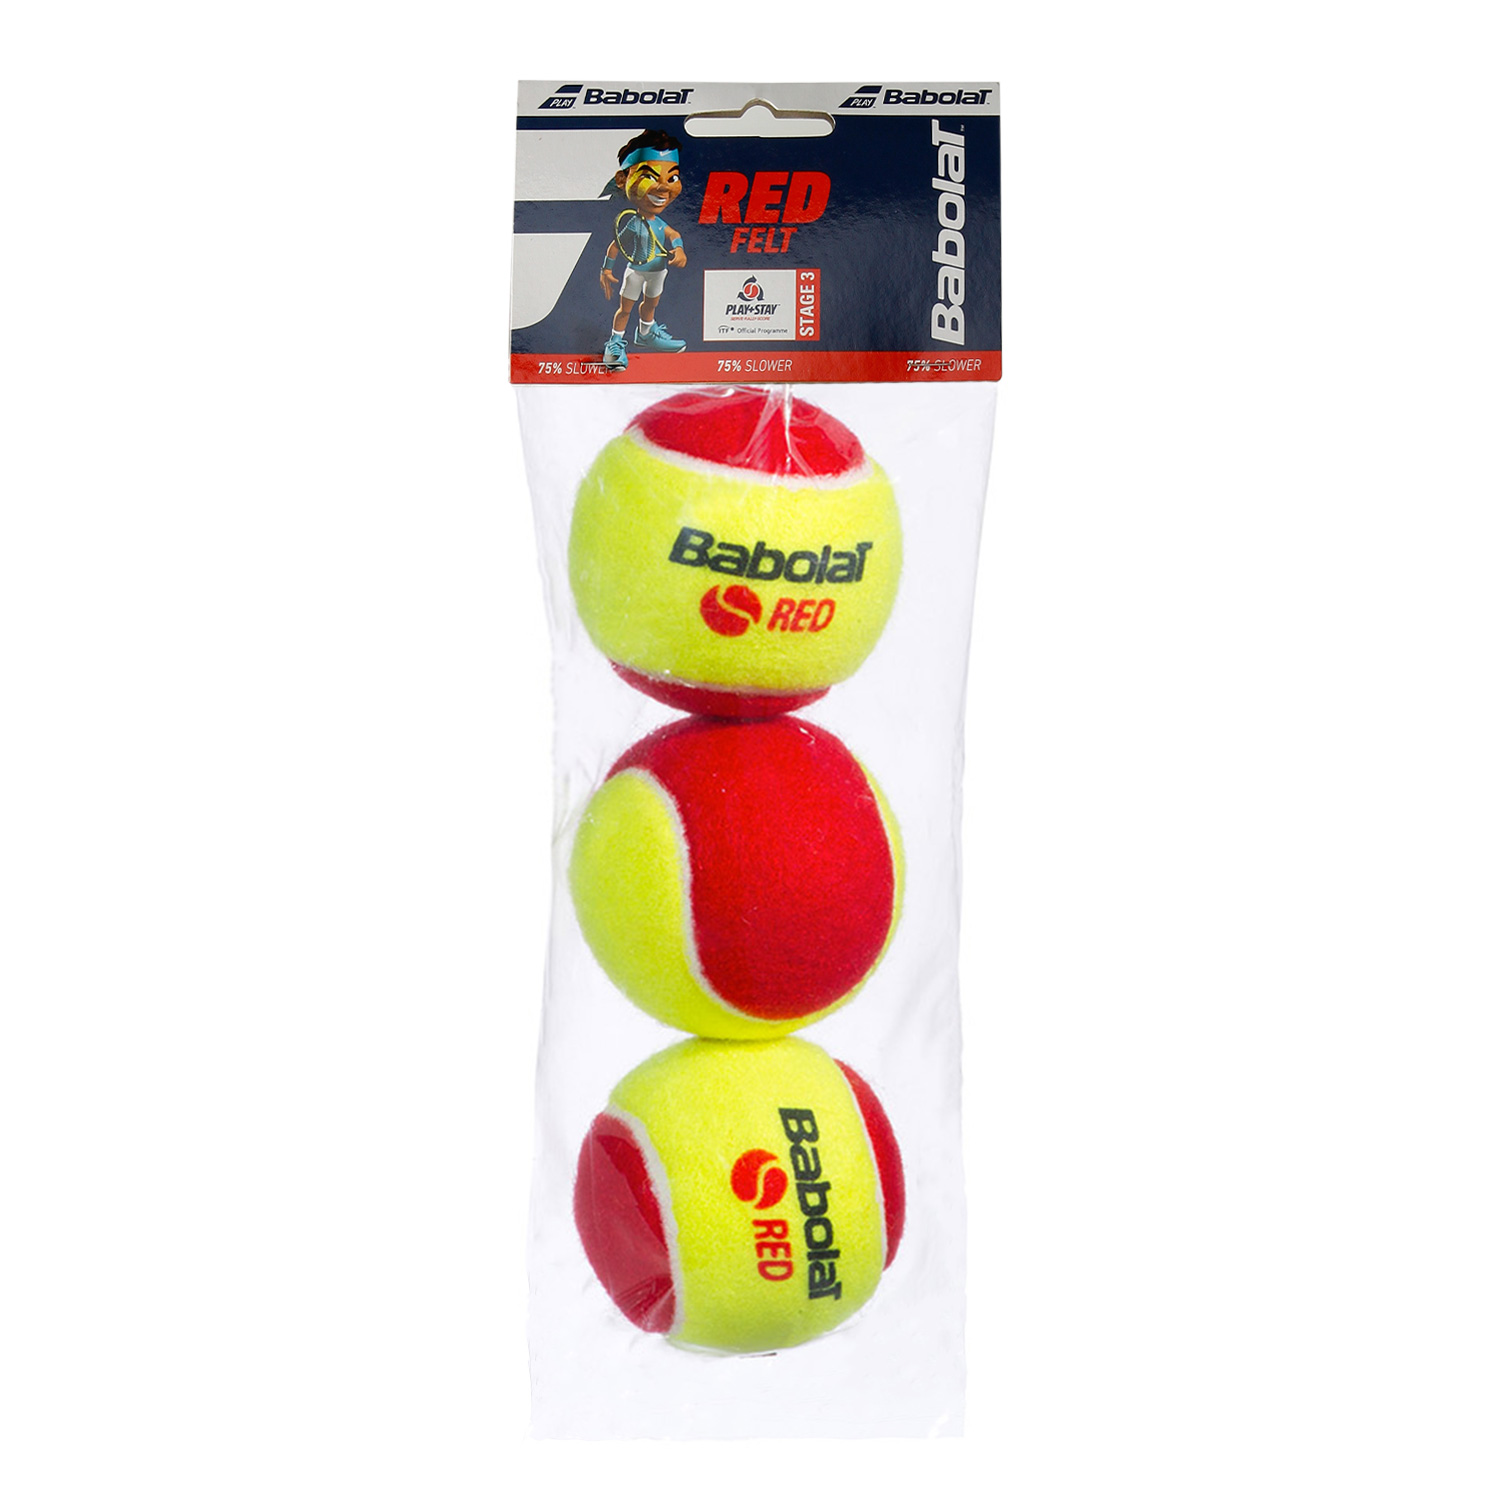 Babolat Red - Pack of 3 Balls